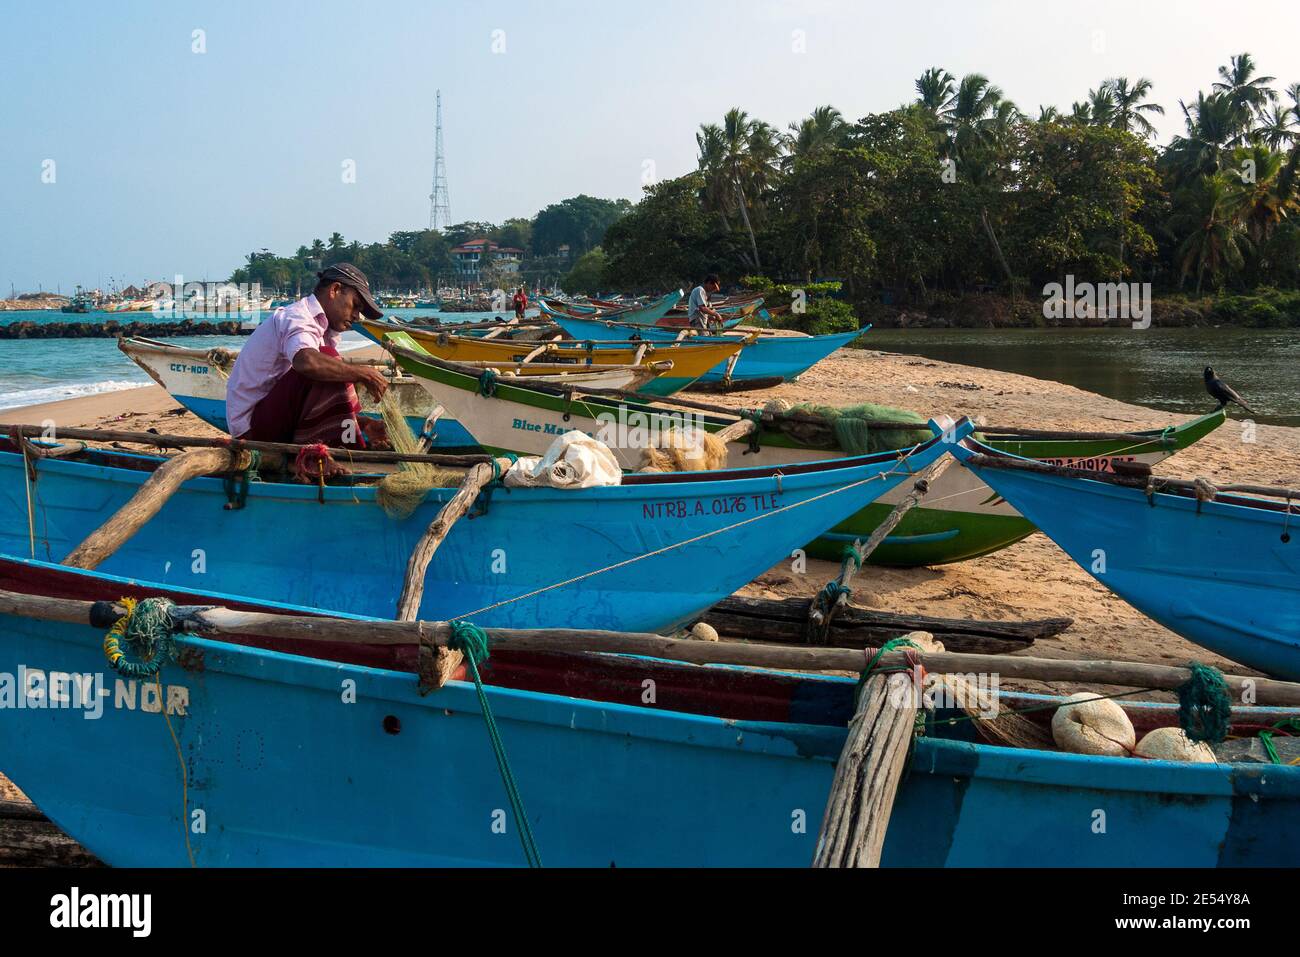 Tangalle, Sri Lanka: fishermen repair the nets on the boats that are on the city beach Stock Photo